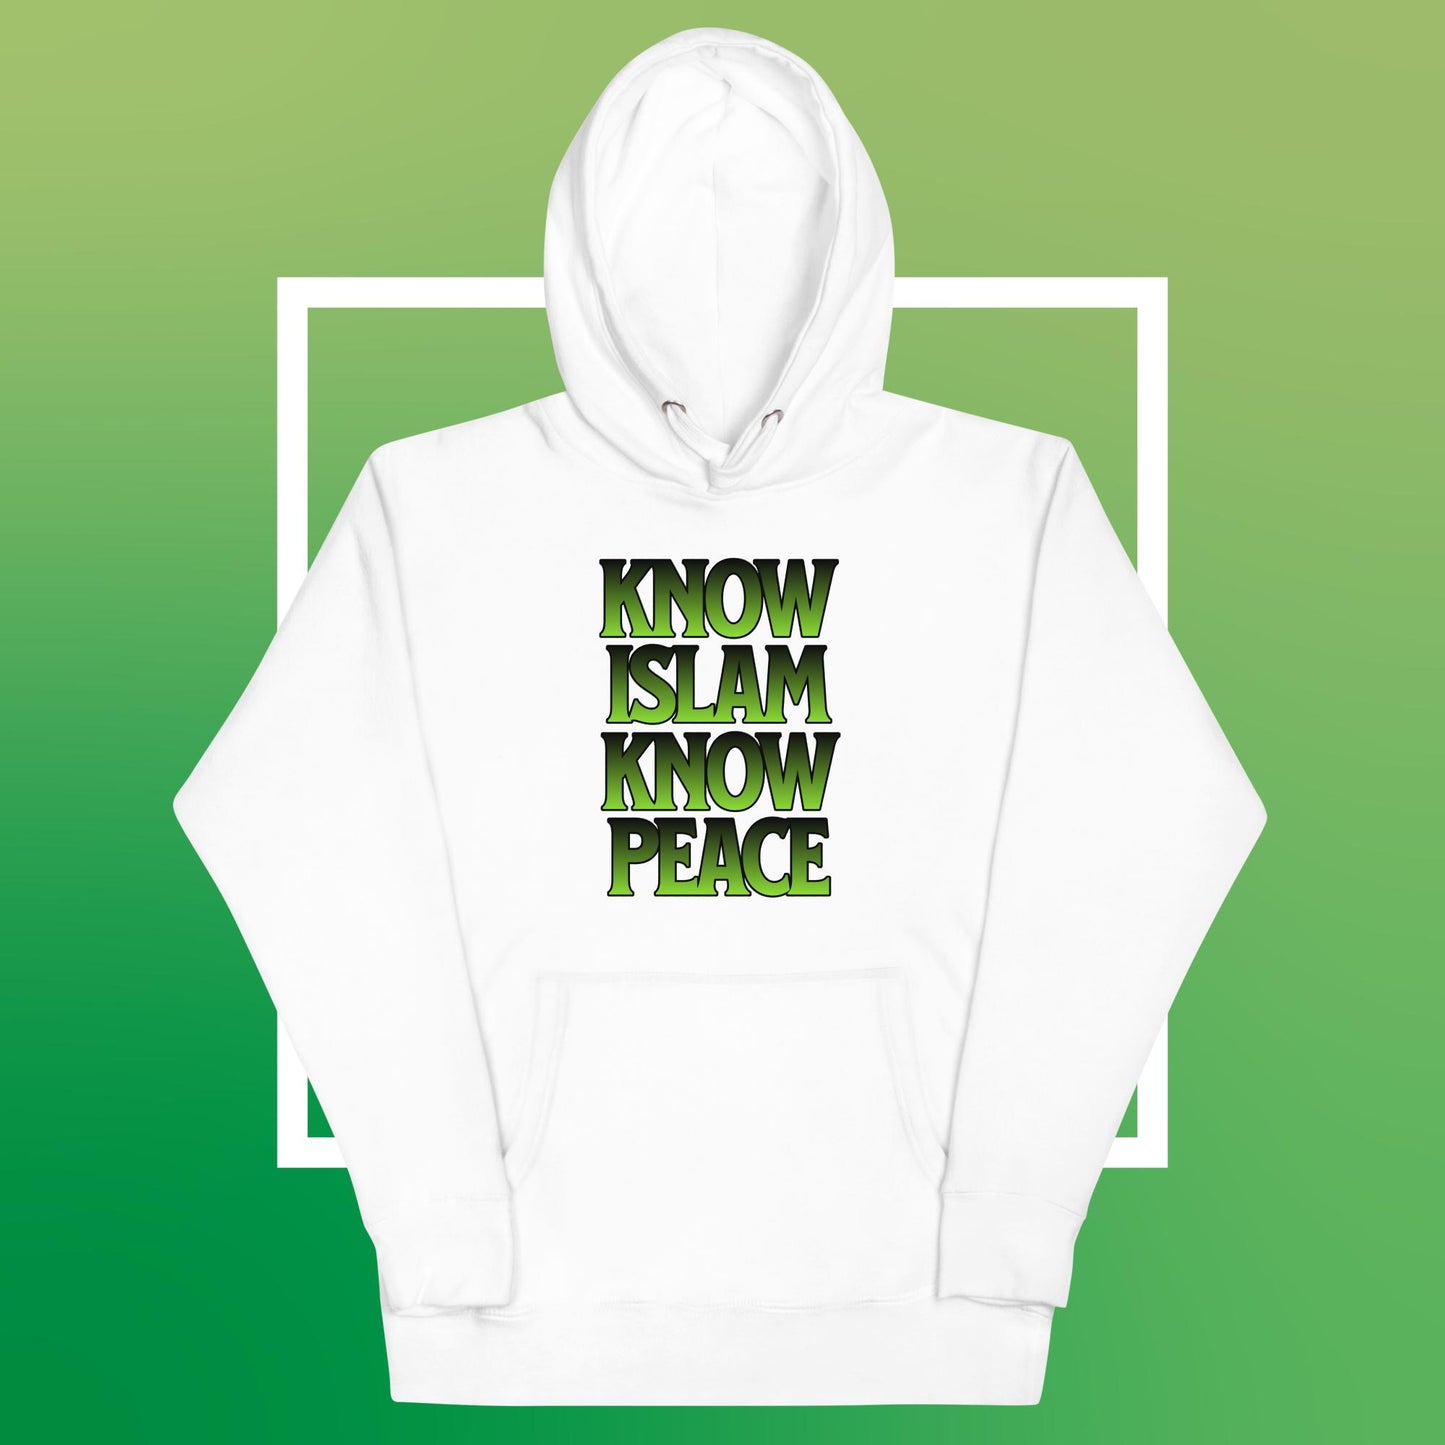 DEEN Know Islam Know Peace Unisex Hoodie